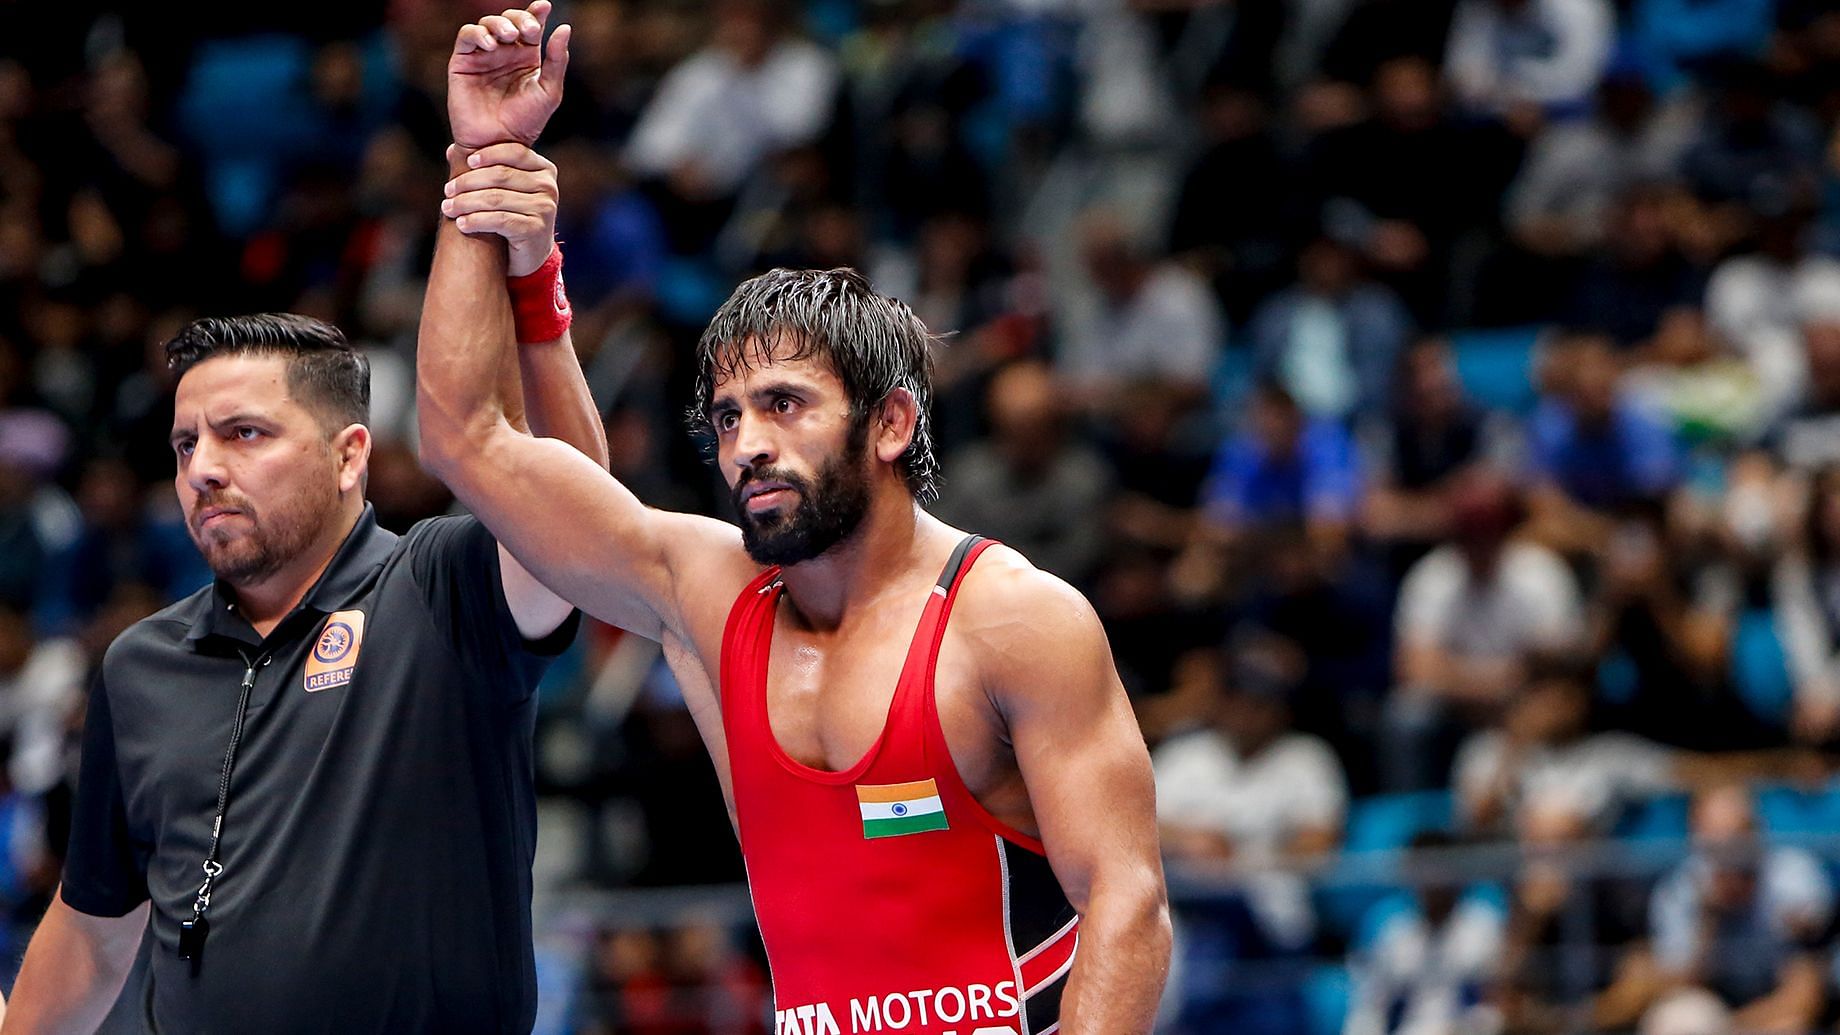 Bajrang Punia and Ravi Kumar Dahiya have booked Olympic quotas in their categories